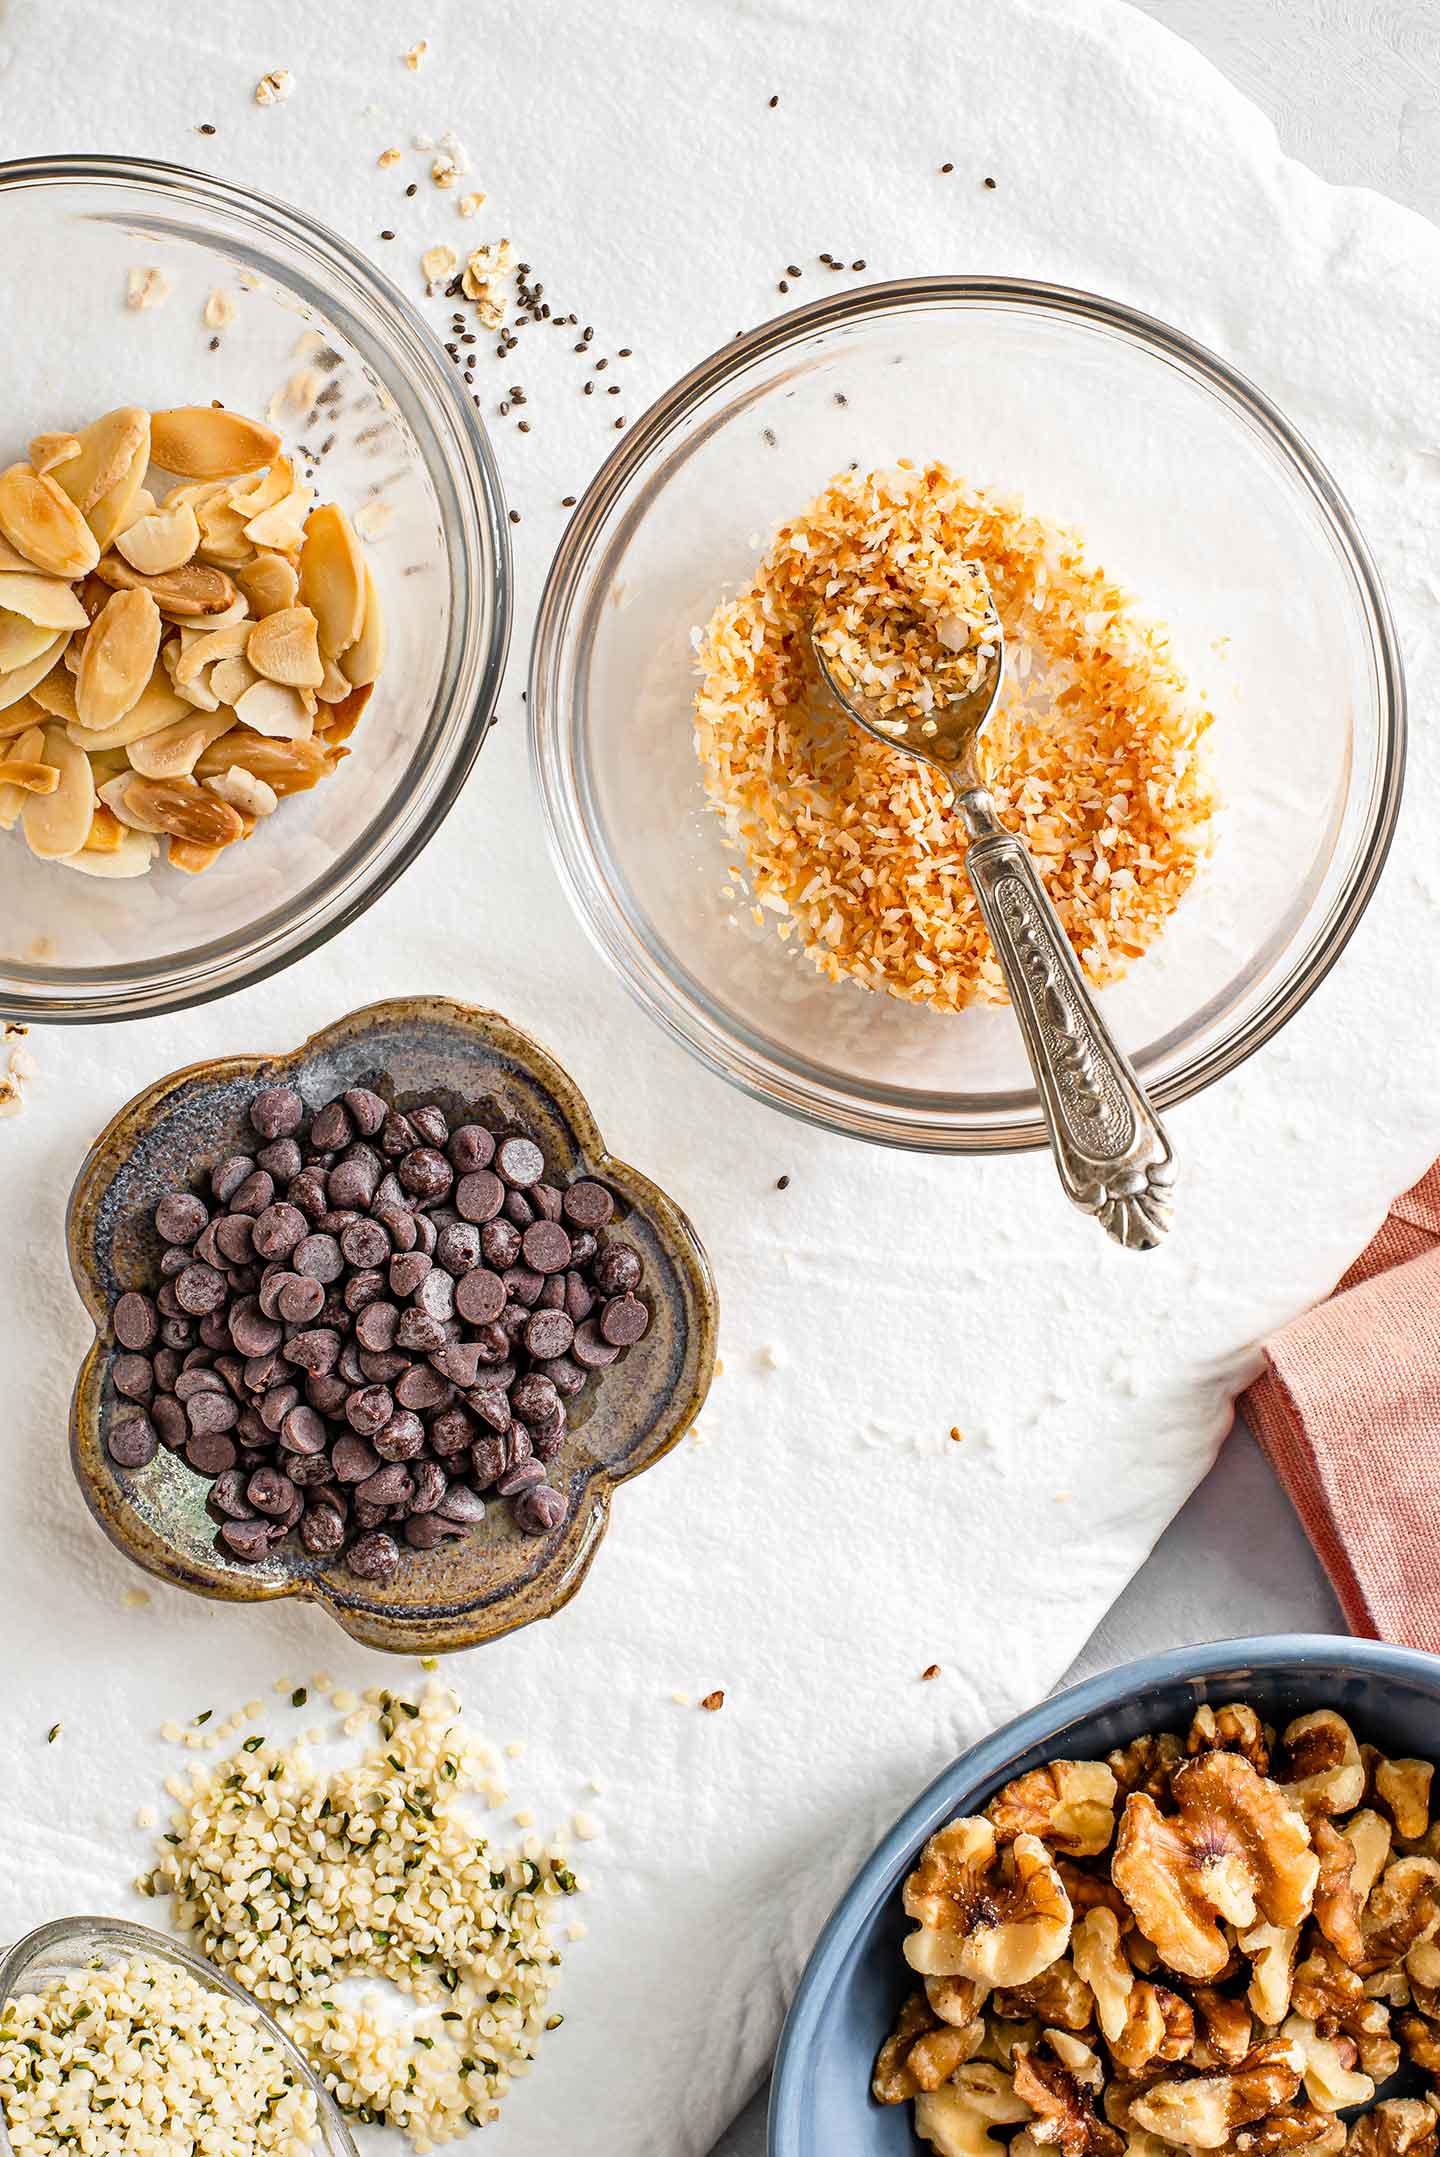 Top down view of toppings for overnight oats. Toasted almonds and coconut, chocolate chips, hemp seeds, and walnuts are pictured in separate dishes.